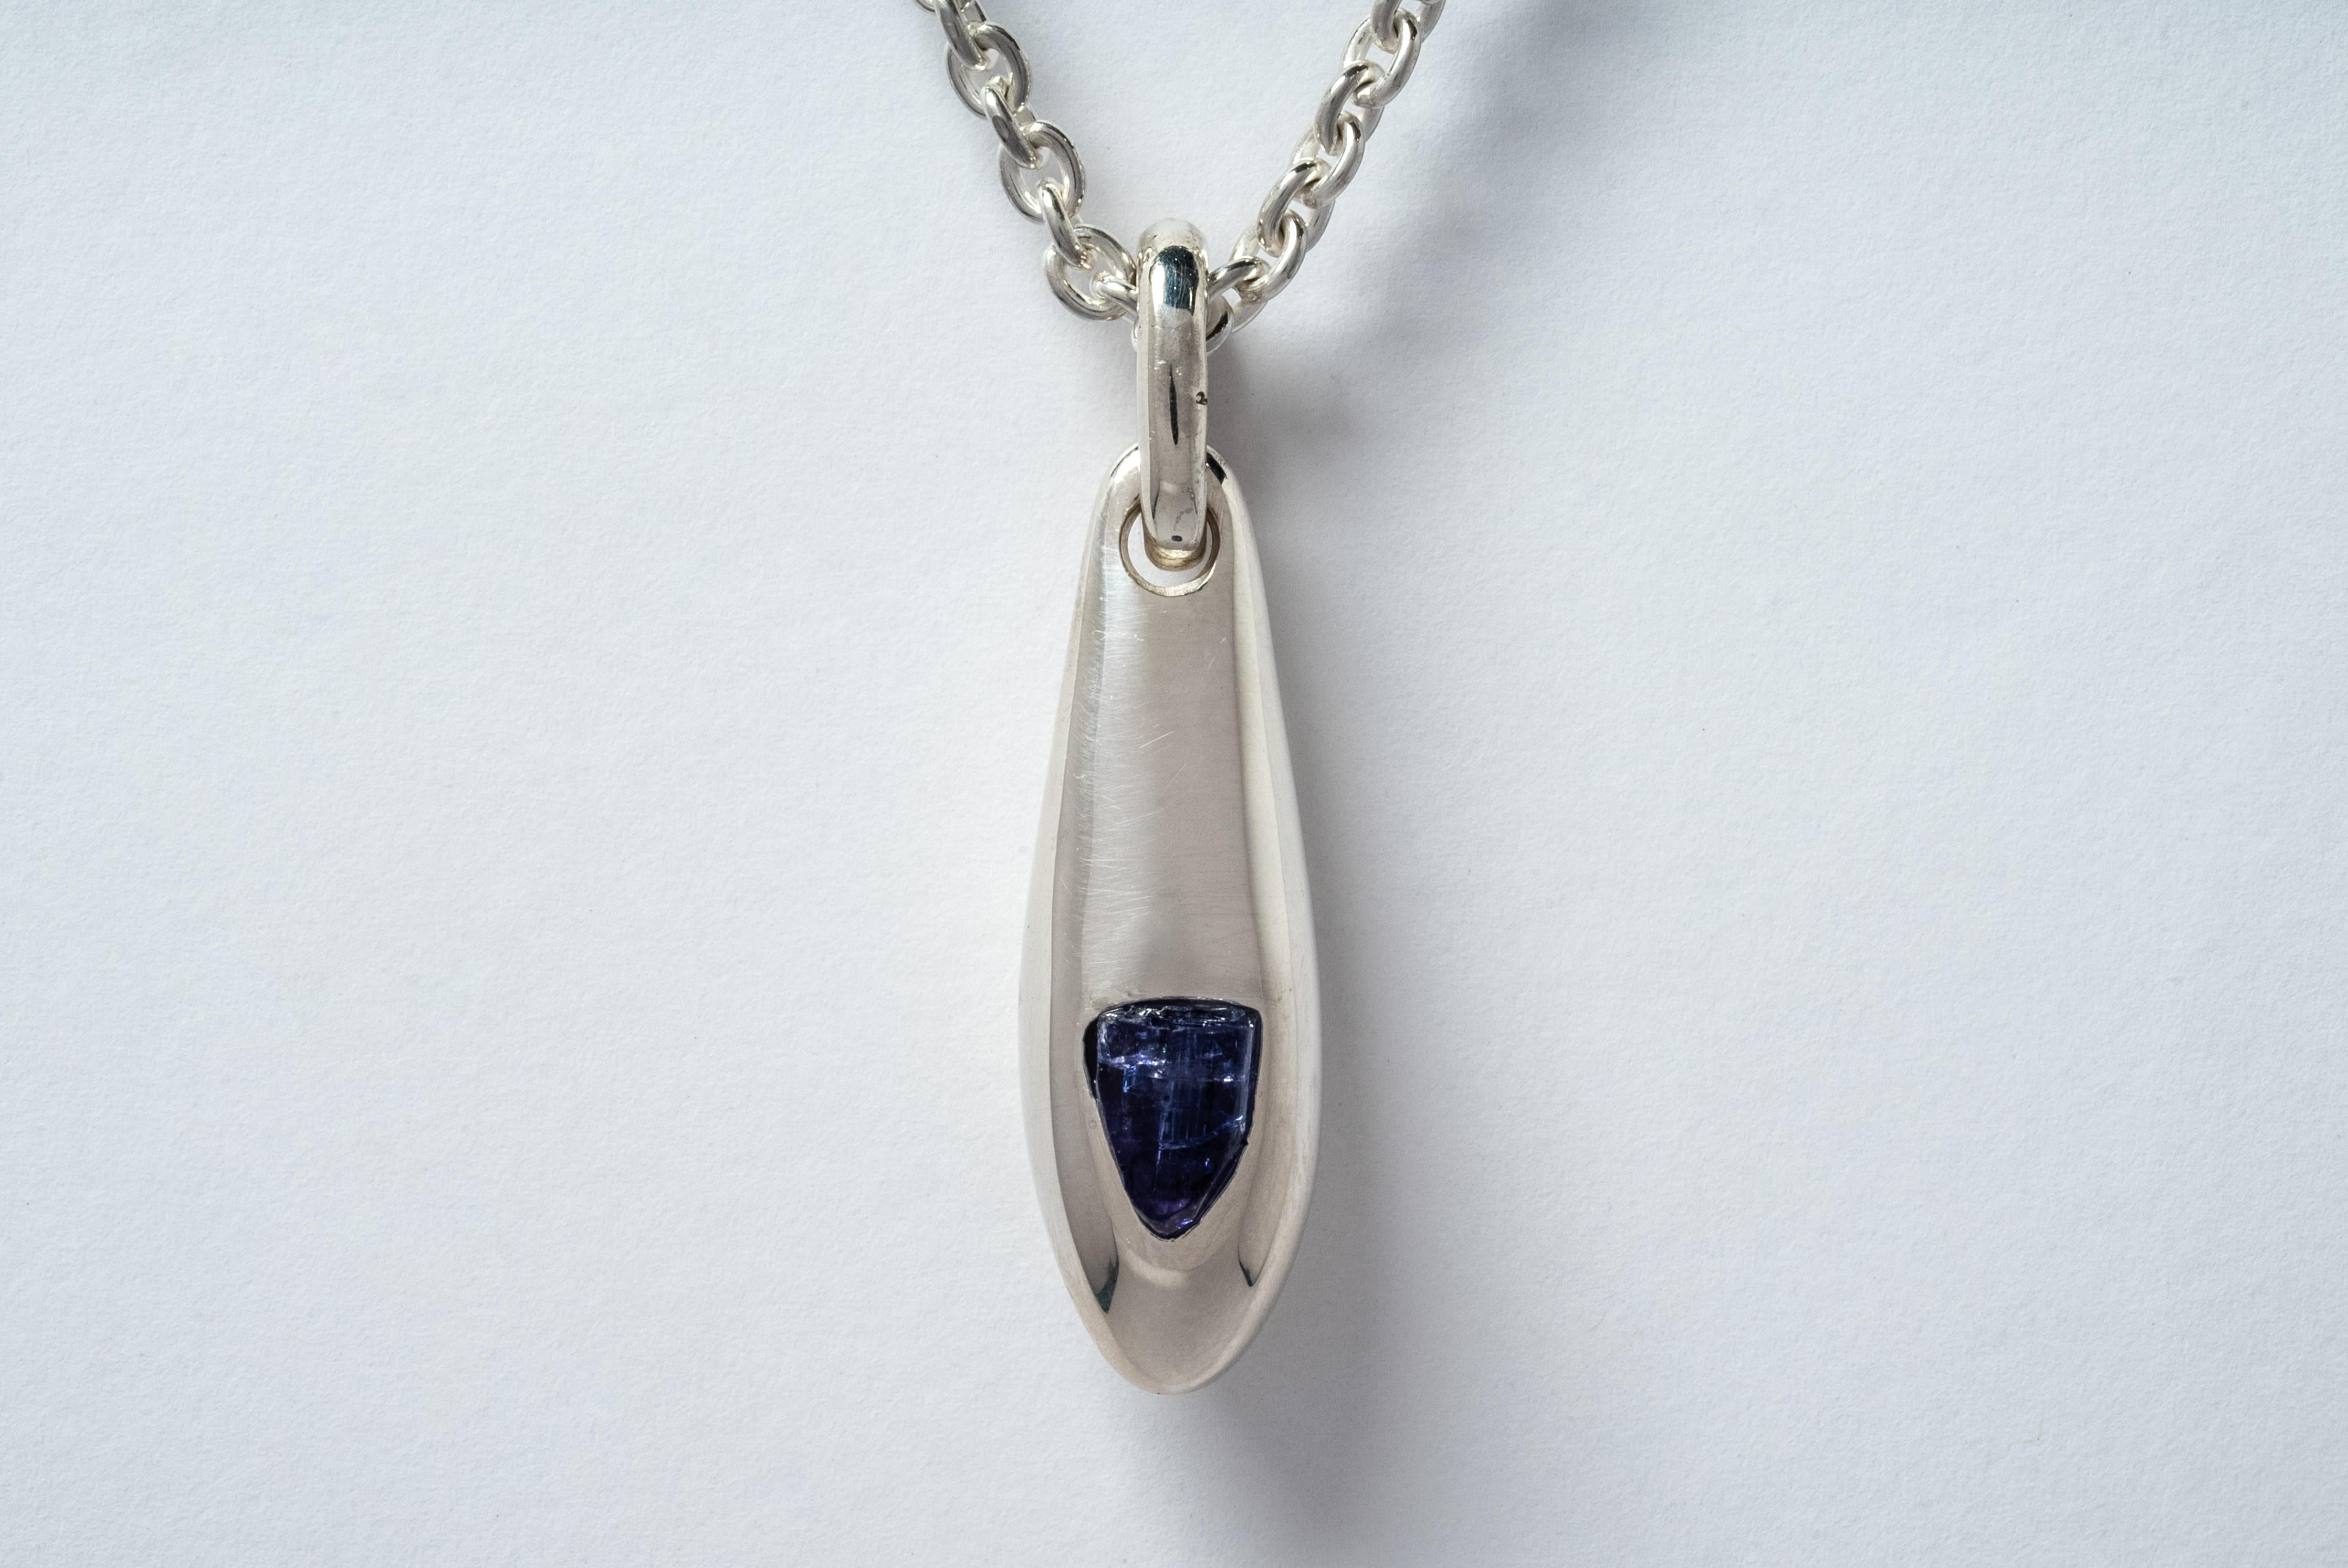 Necklace in the shape of chrysalis made in polished sterling silver and a slab of rough tanzanite. It comes on 74 cm sterling silver chain.
Dimensions : Pendant length (W × H): 11 mm × 46 mm
Chain length: 740 mm
Weight: 50 grams